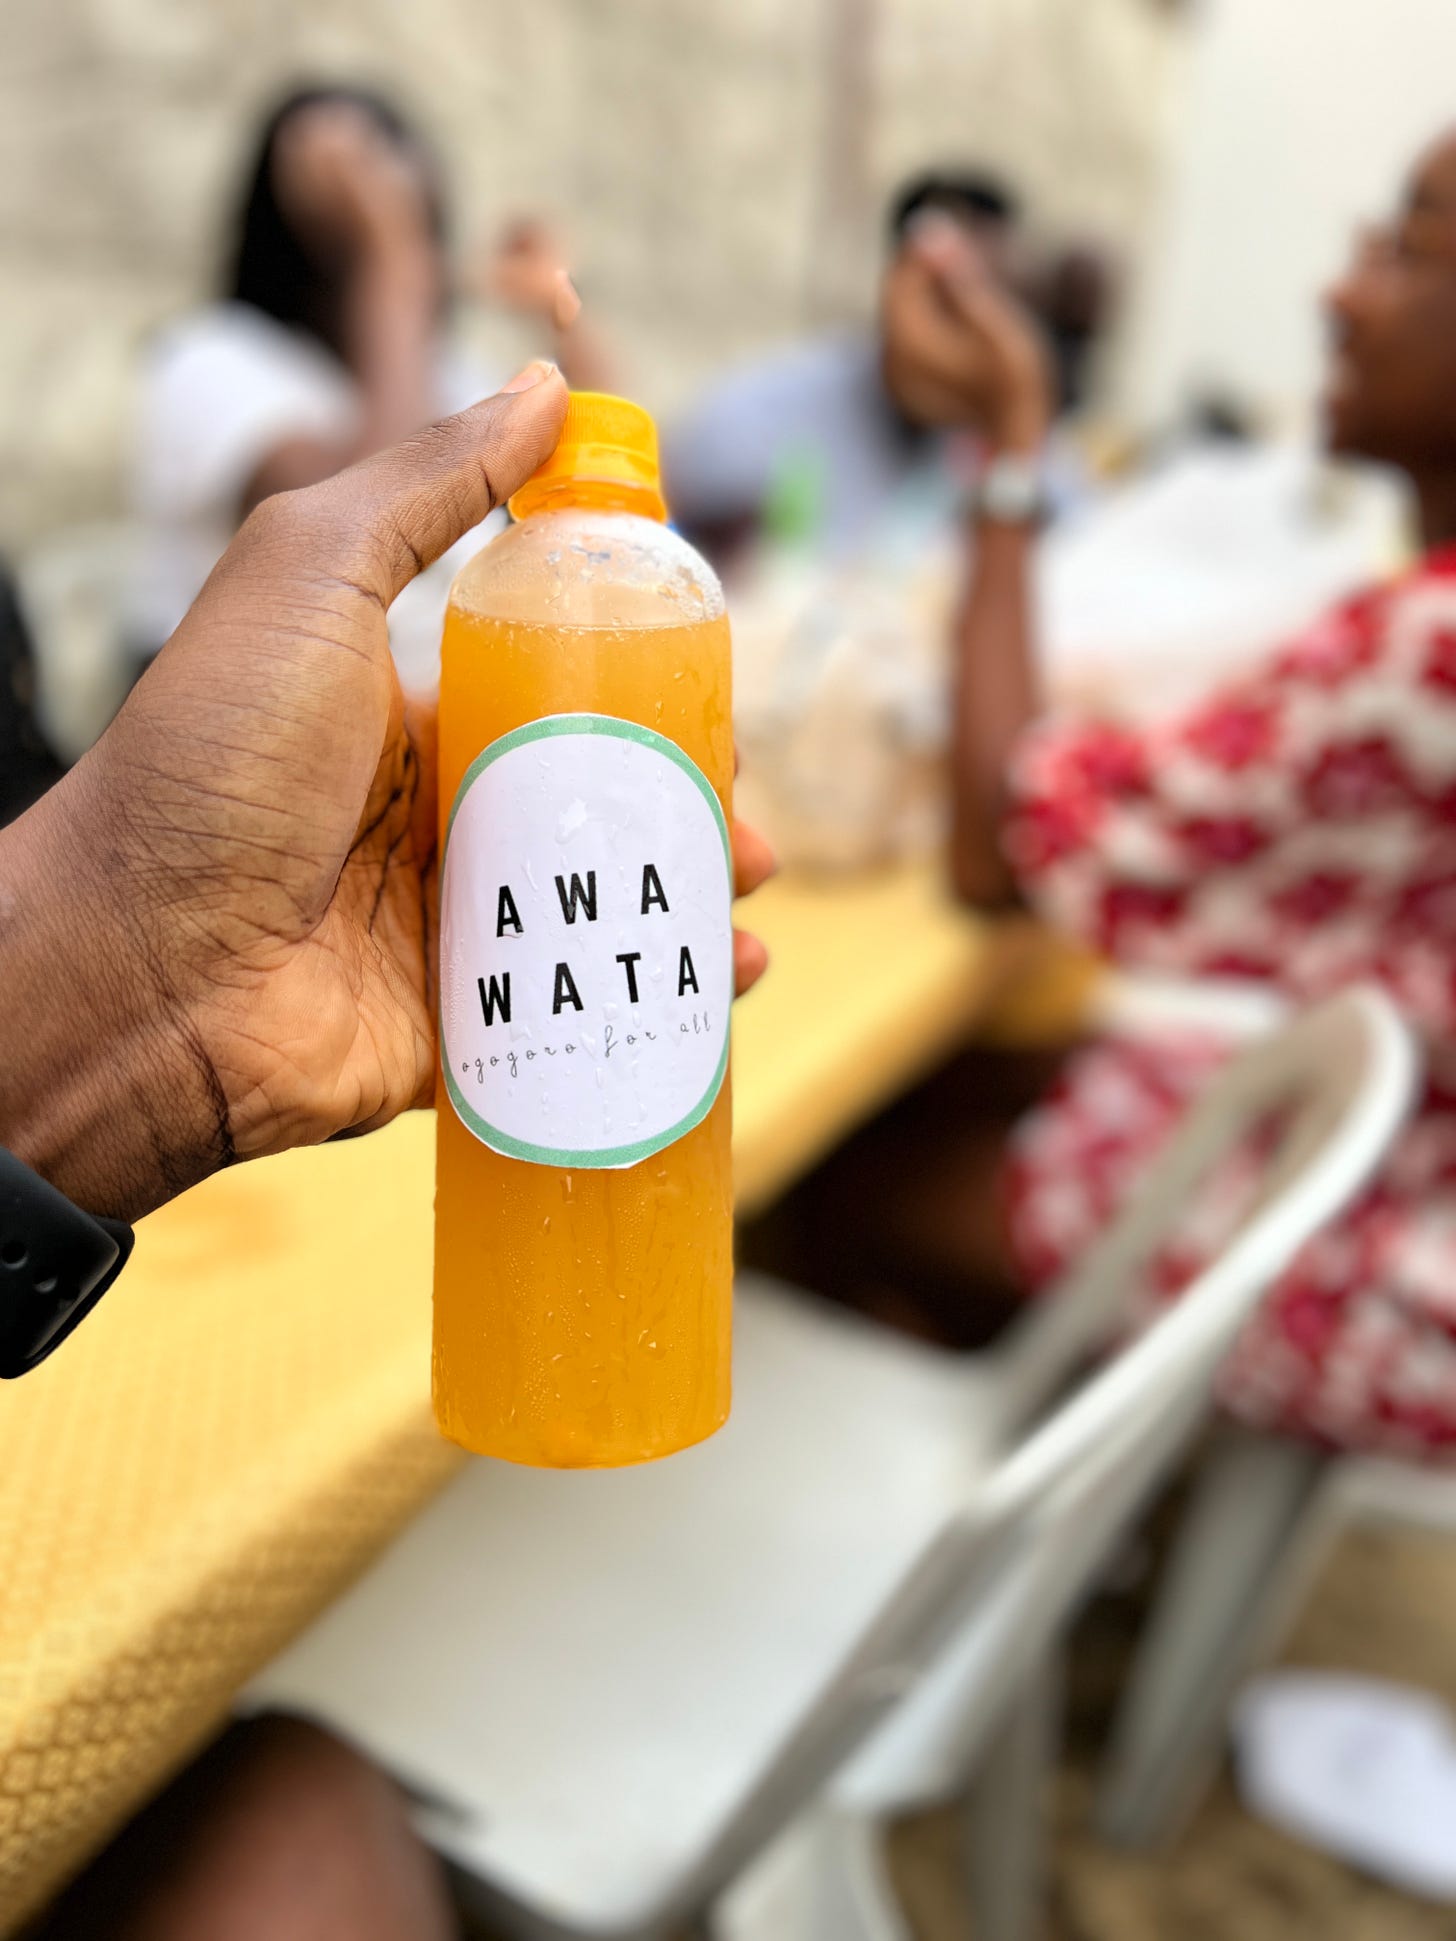 A picture of Awa Wata (our water) a citrus remix of the locally made alcoholic drink Ogogoro at a community get together at El Padrino in Lagos, Nigeria